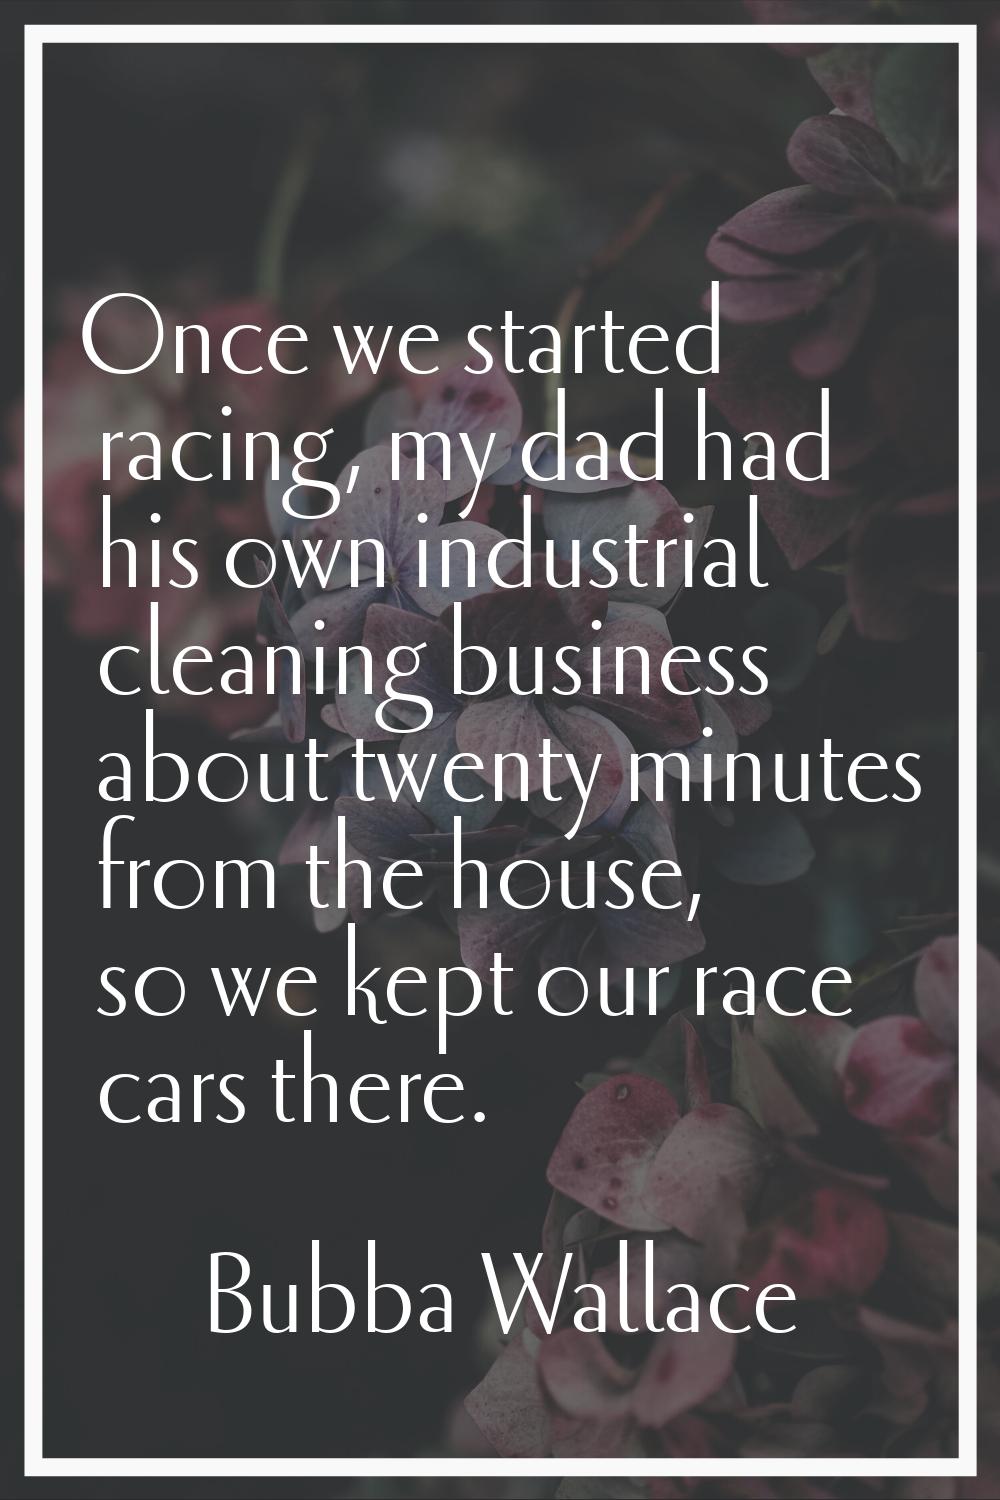 Once we started racing, my dad had his own industrial cleaning business about twenty minutes from t